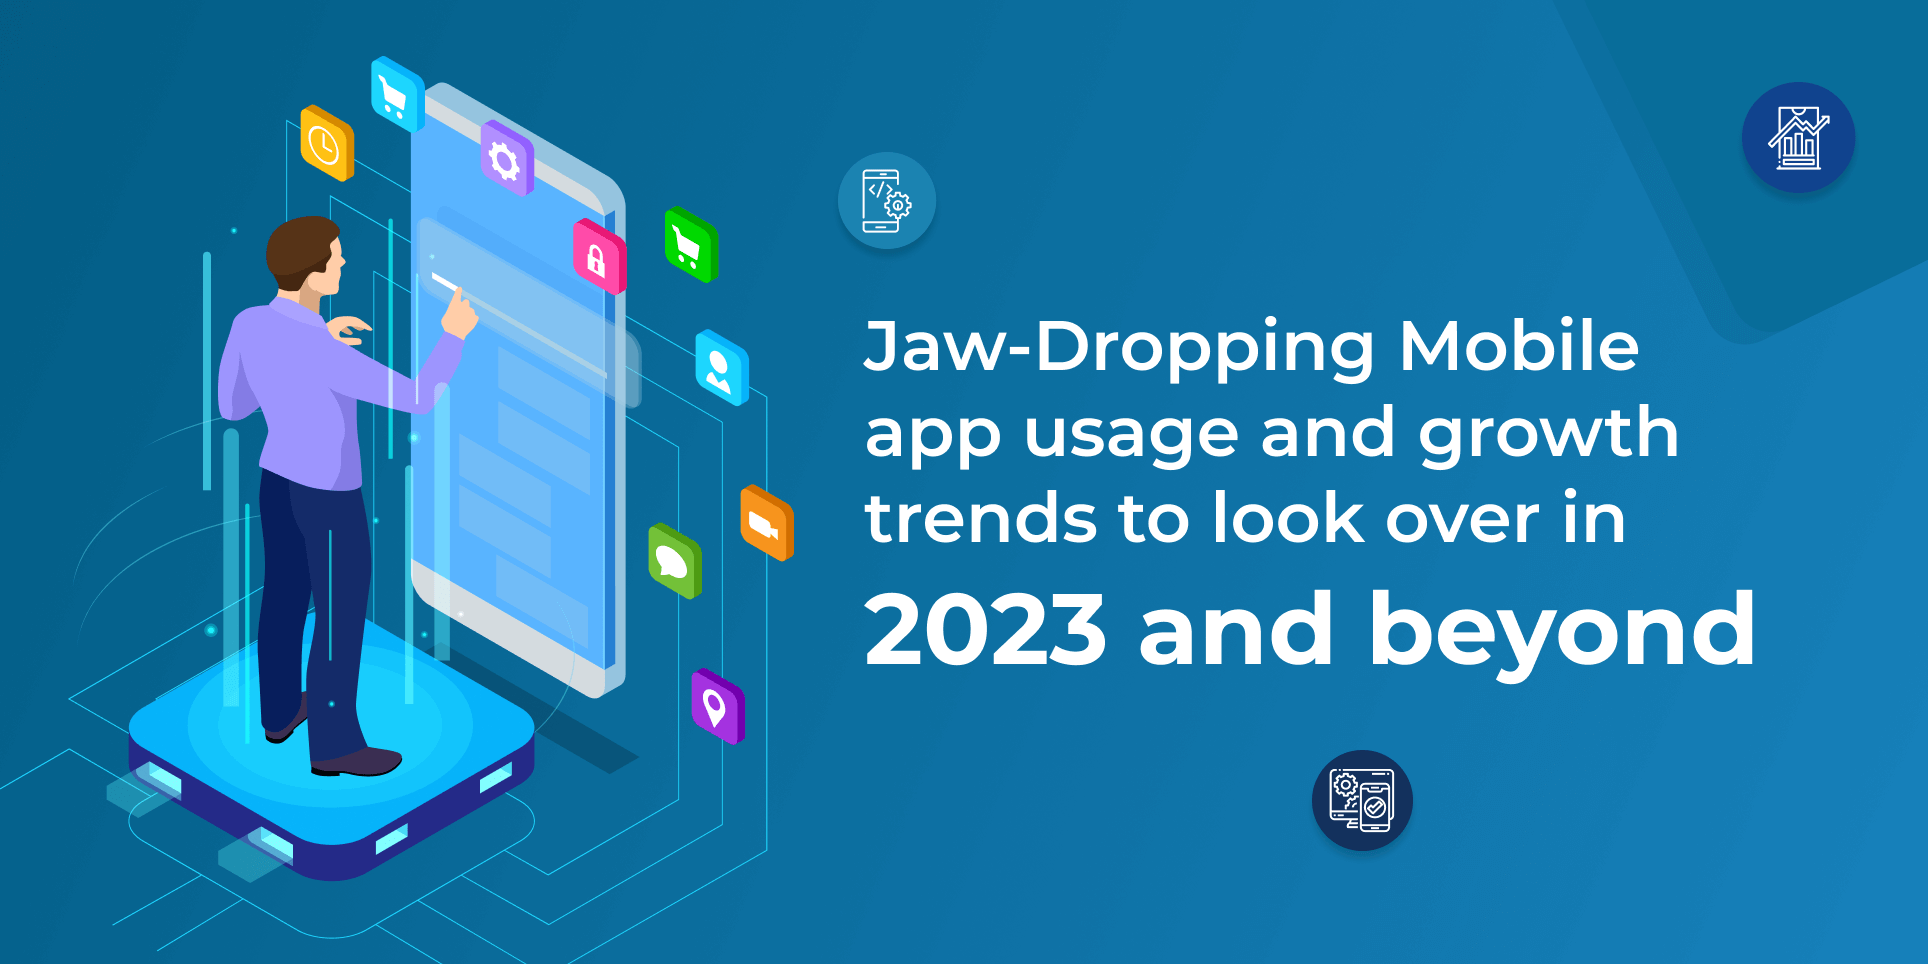 Jaw-Dropping Mobile app usage and growth trends to look over in 2023 and beyond